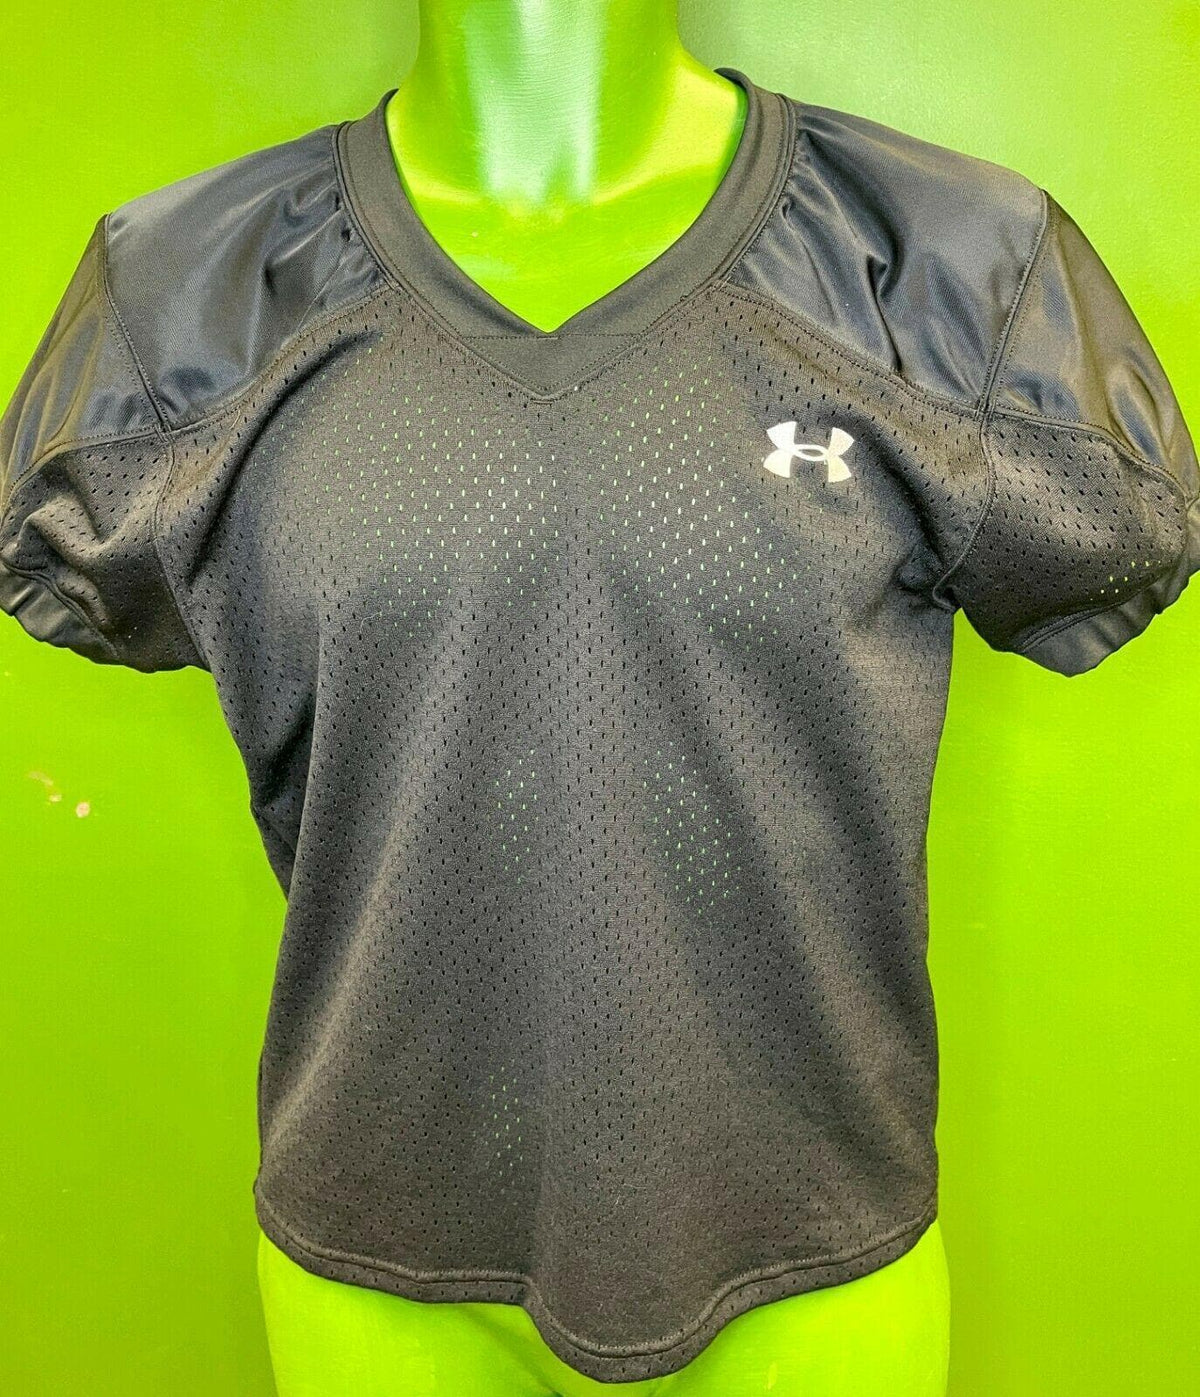 American Football Under Armour #5 Black Jersey Mesh Scrimmage Youth L 14-16